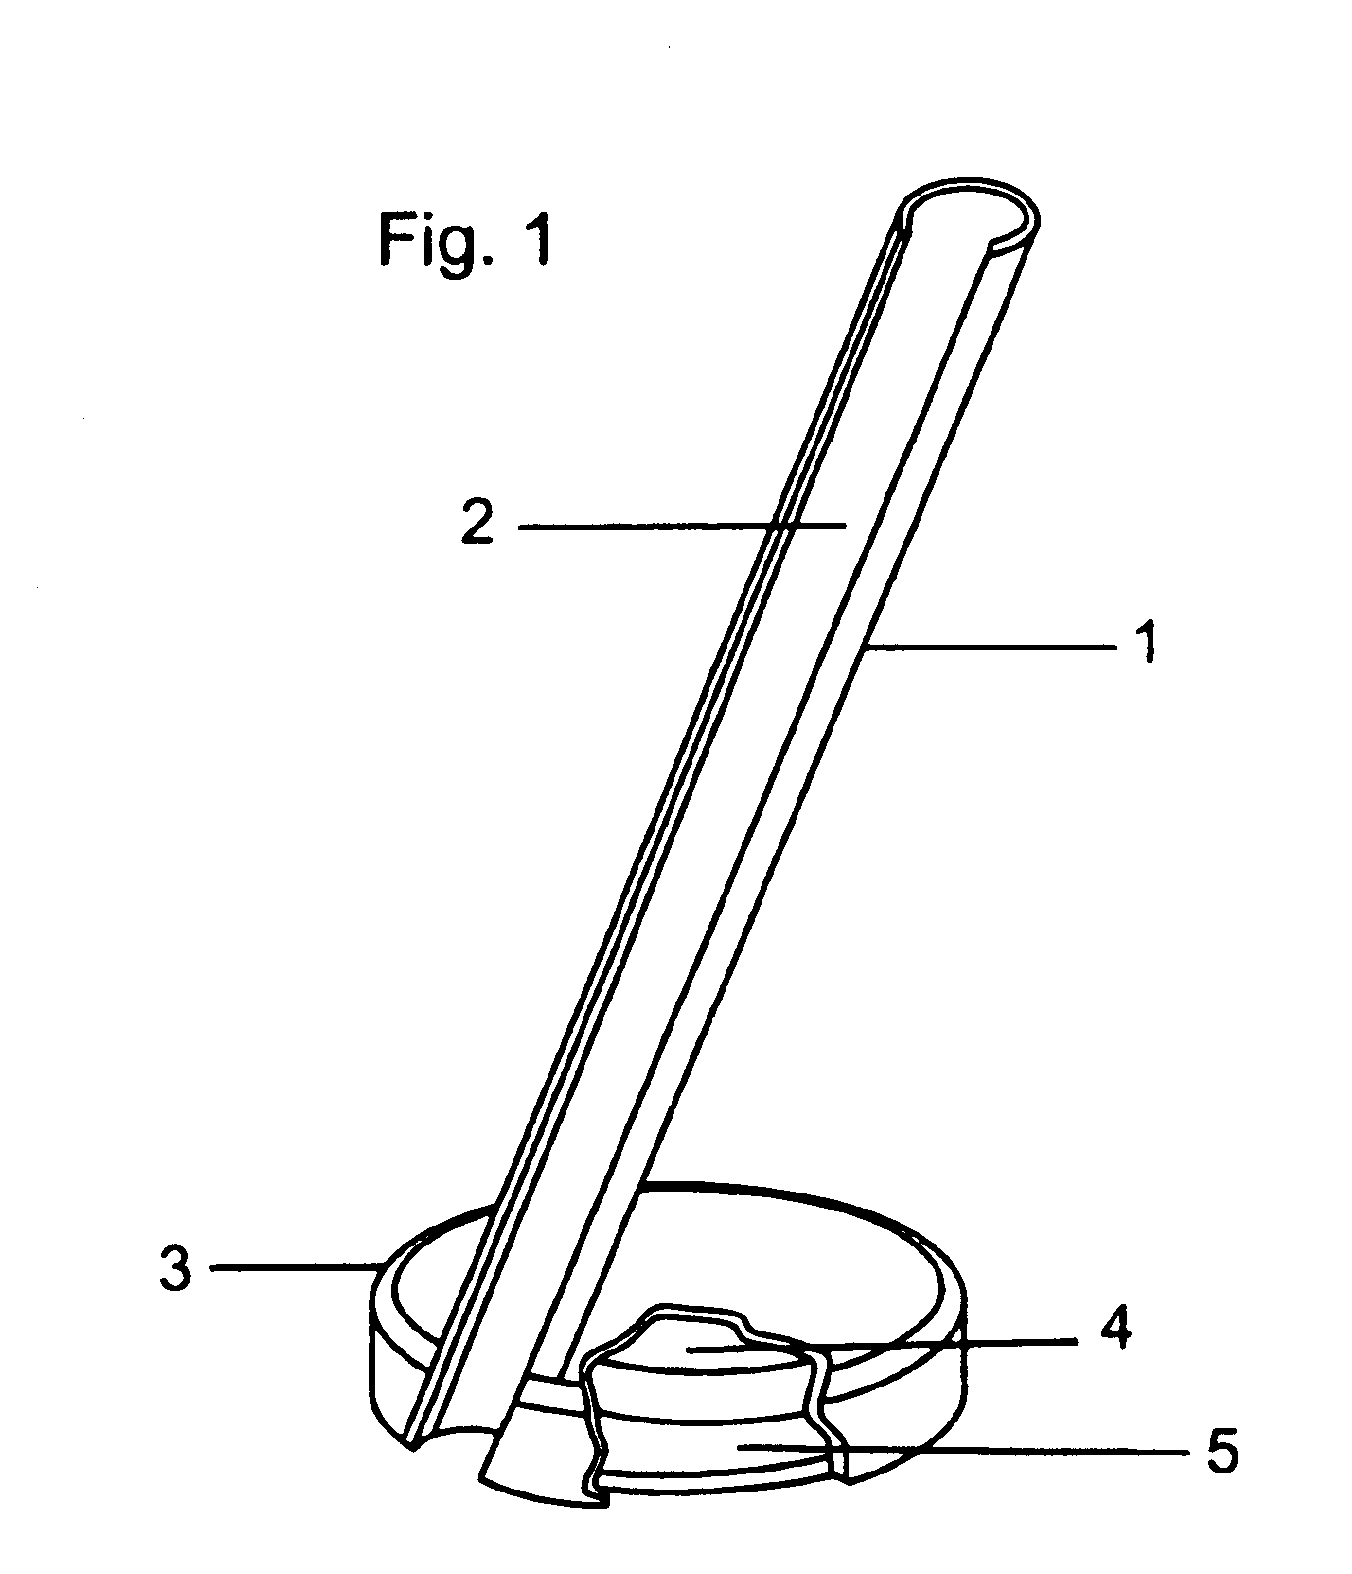 Magnetic writing apparatus